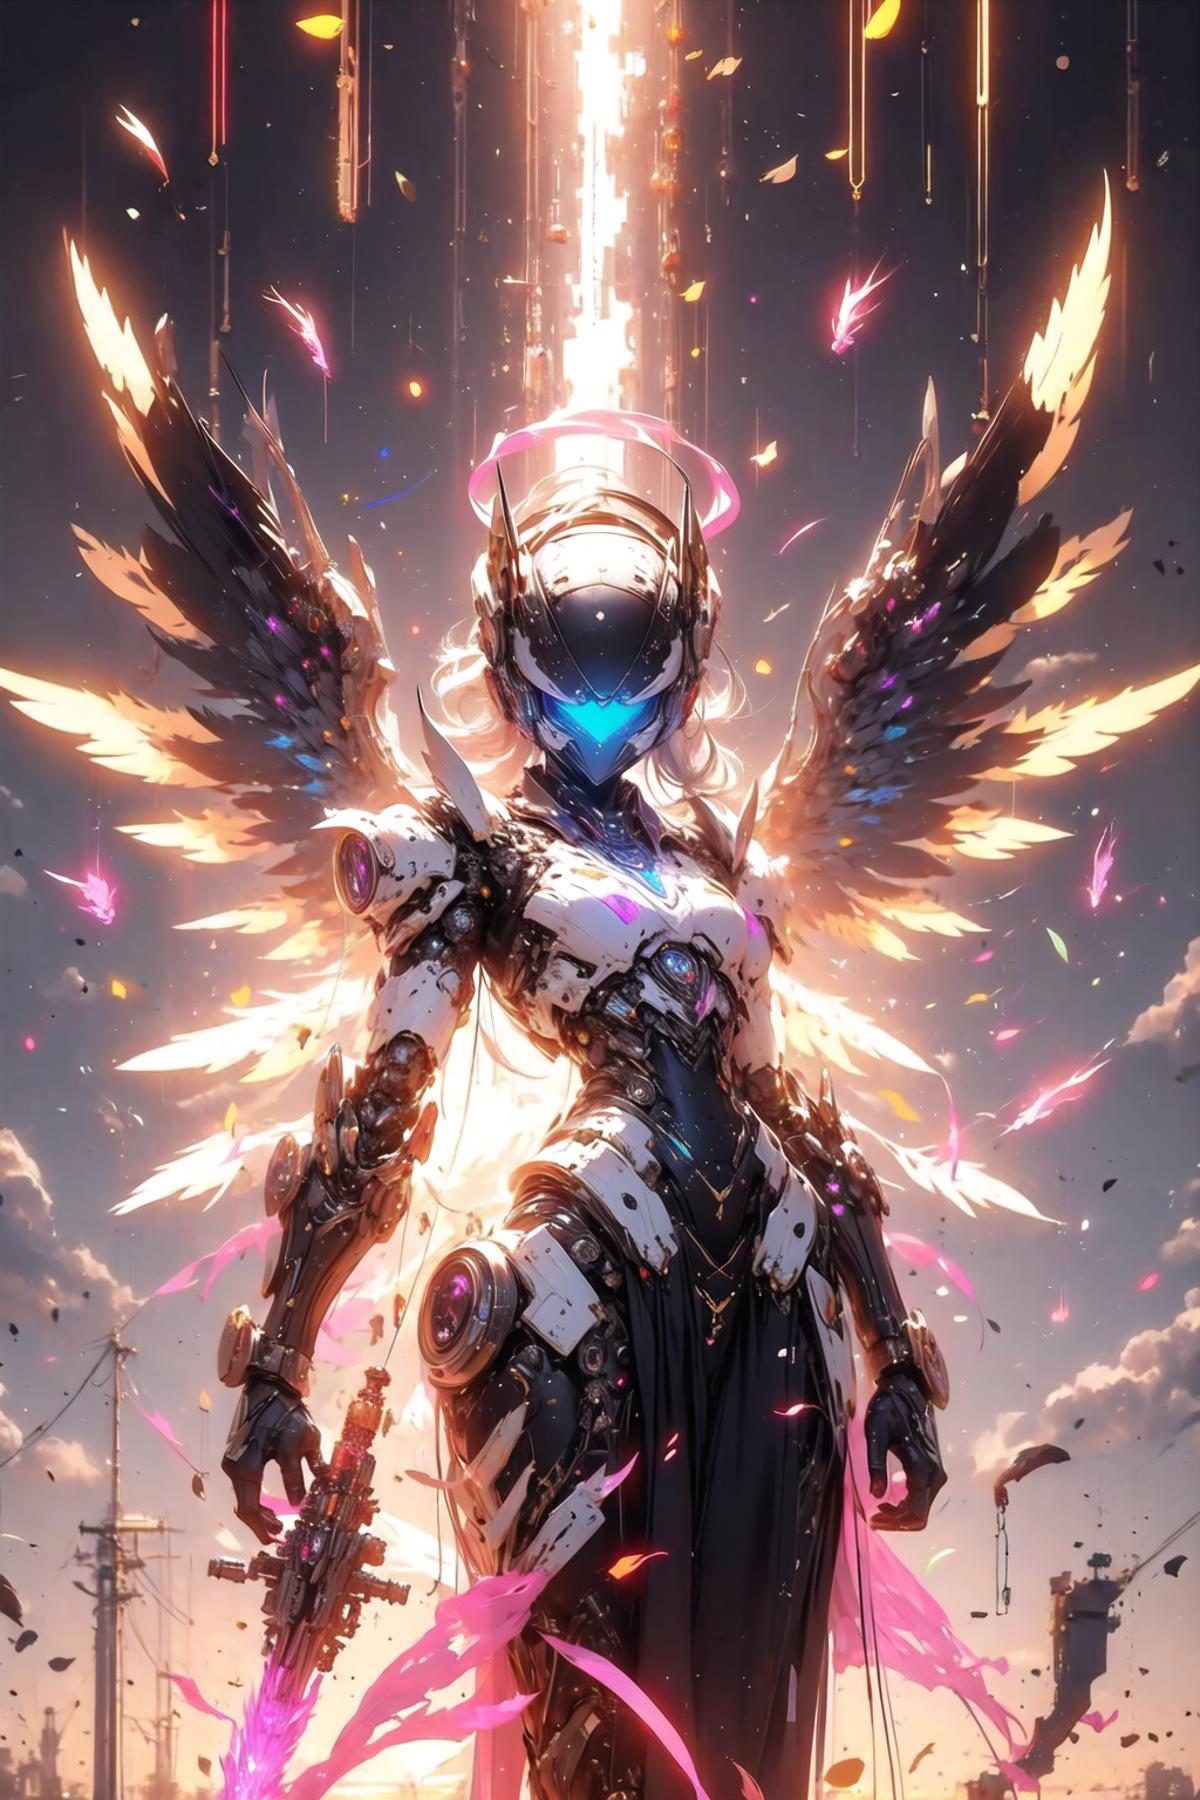 Angelic Warrior with Wings and Armor: A Fantasy Artwork